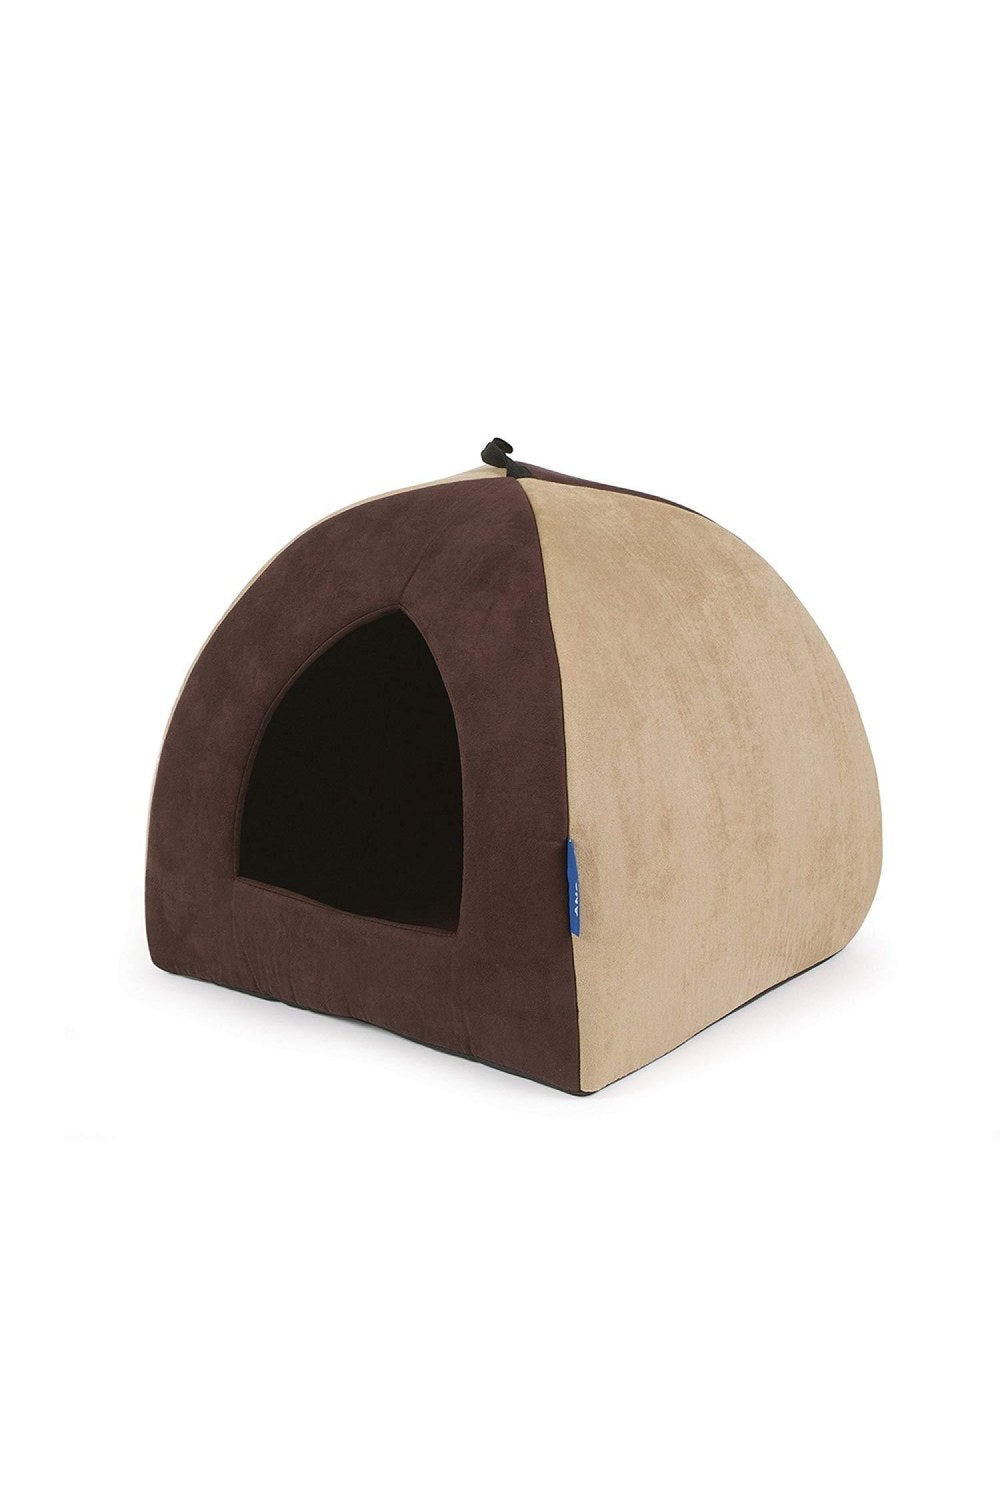 Ancol Pet Products Cat/Small Dog Pyramid Pet Bed (One Size)